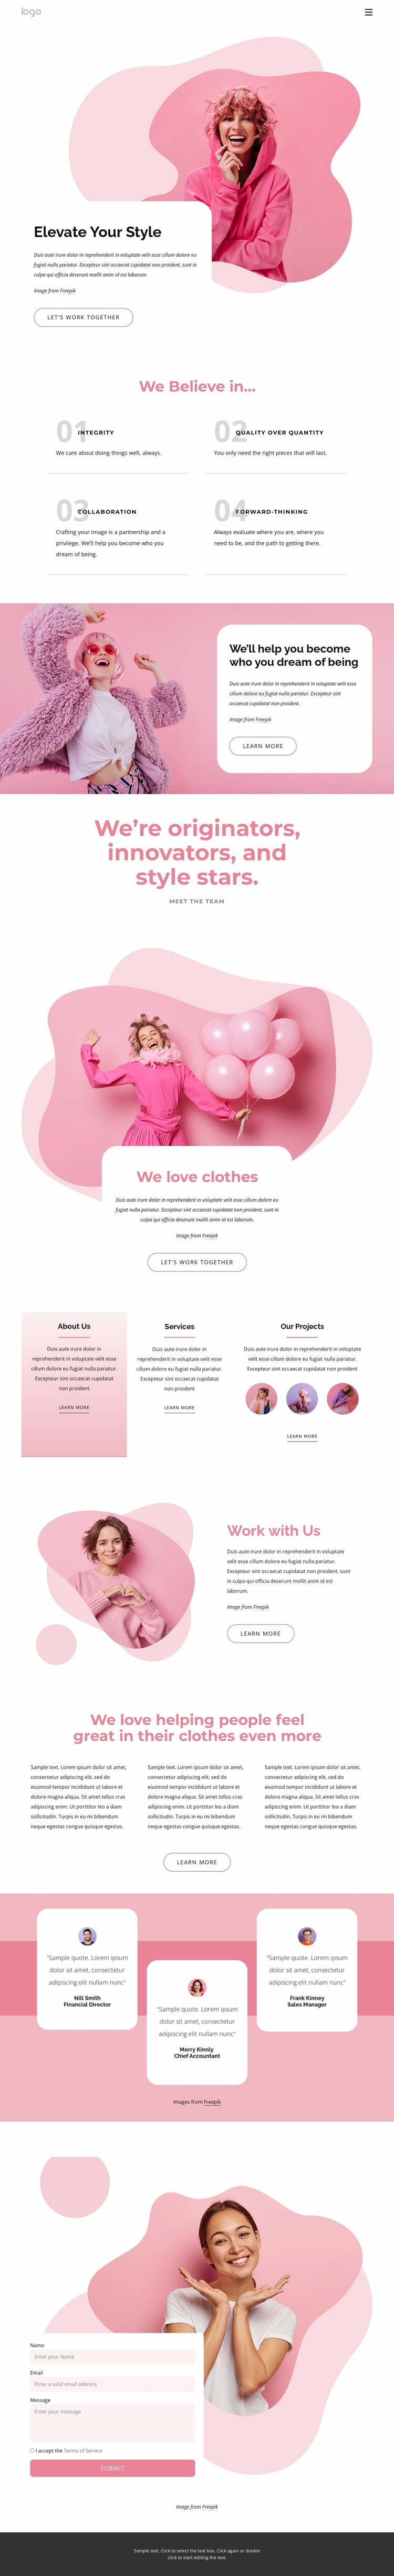 Elevate your style Website Builder Templates